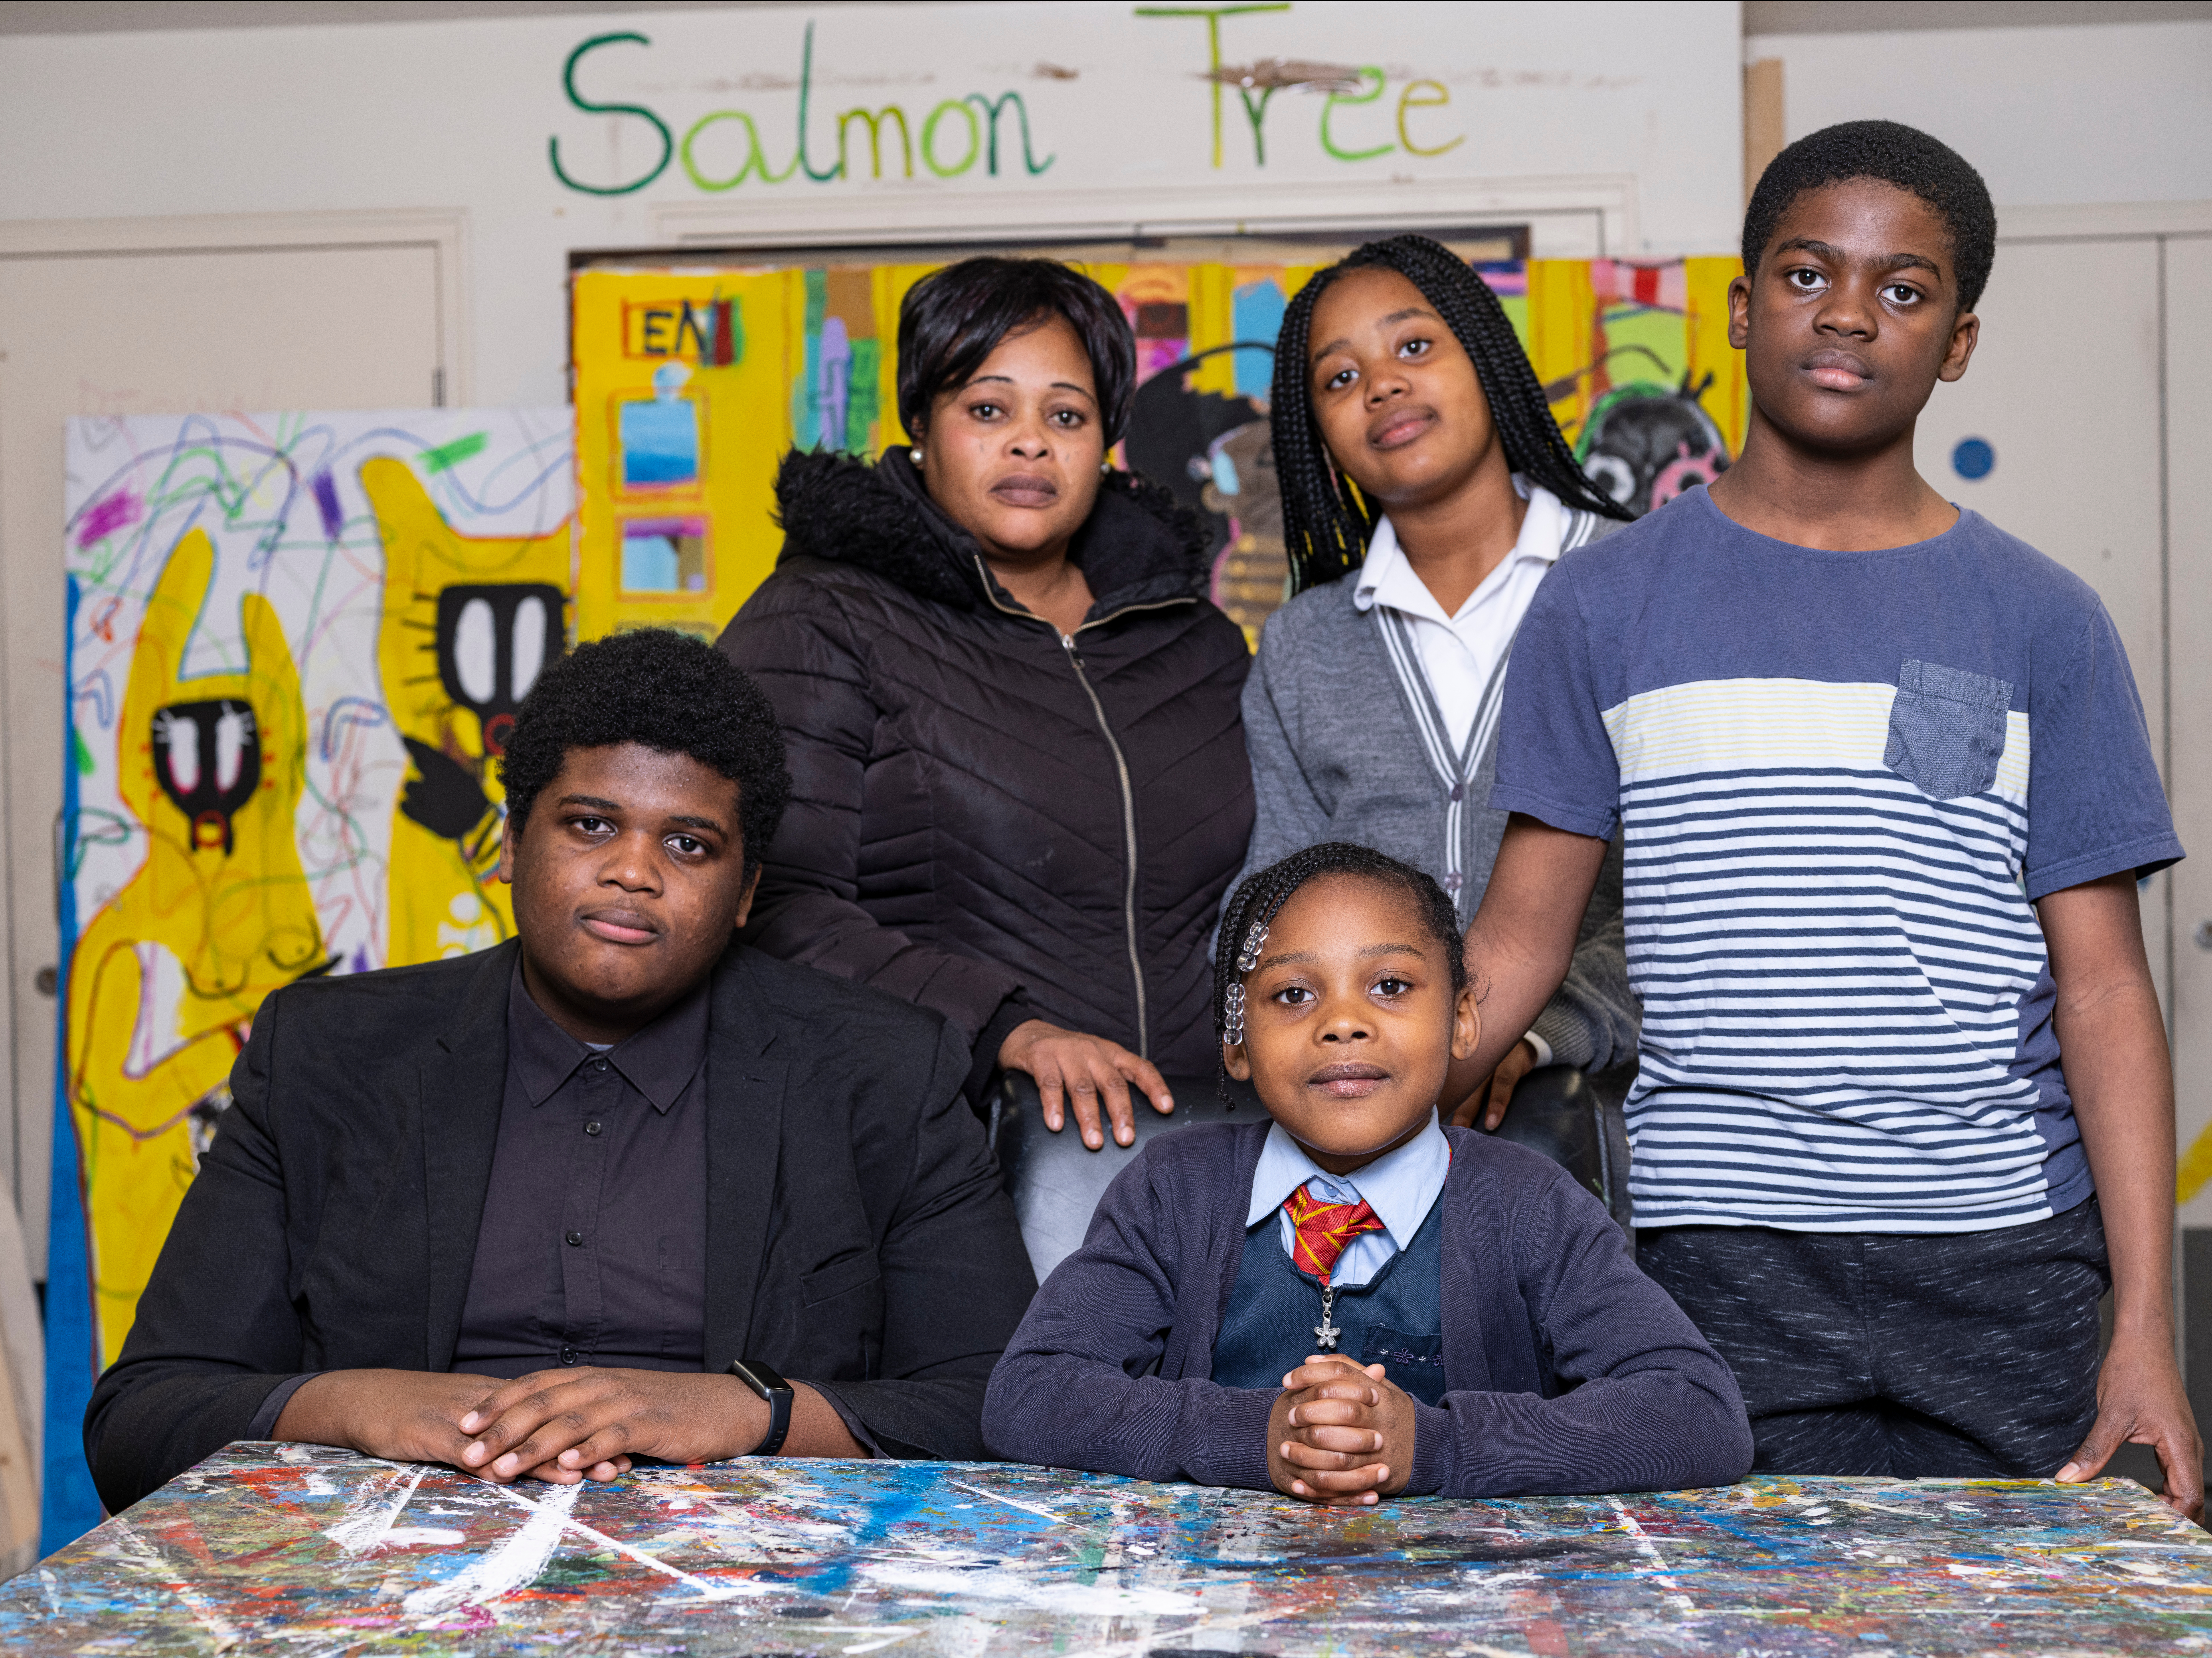 <p>Glory Uhunarabona and her four children are pictured at the Salmon Youth Centre</p>